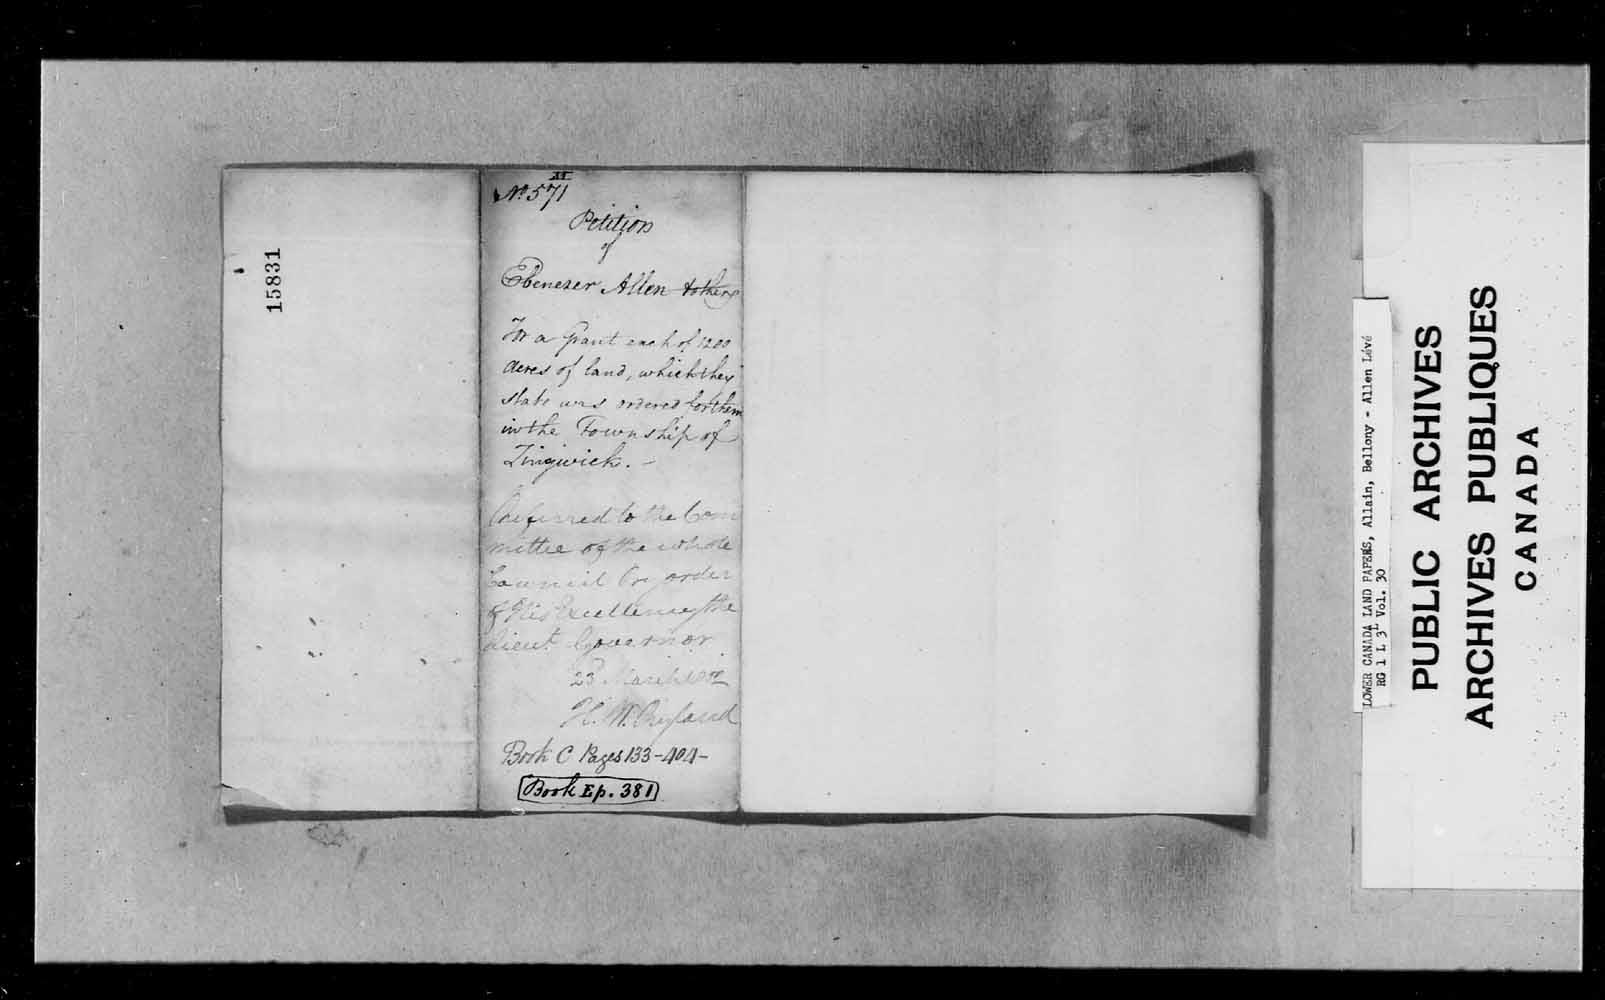 Digitized page of  for Image No.: e003702661